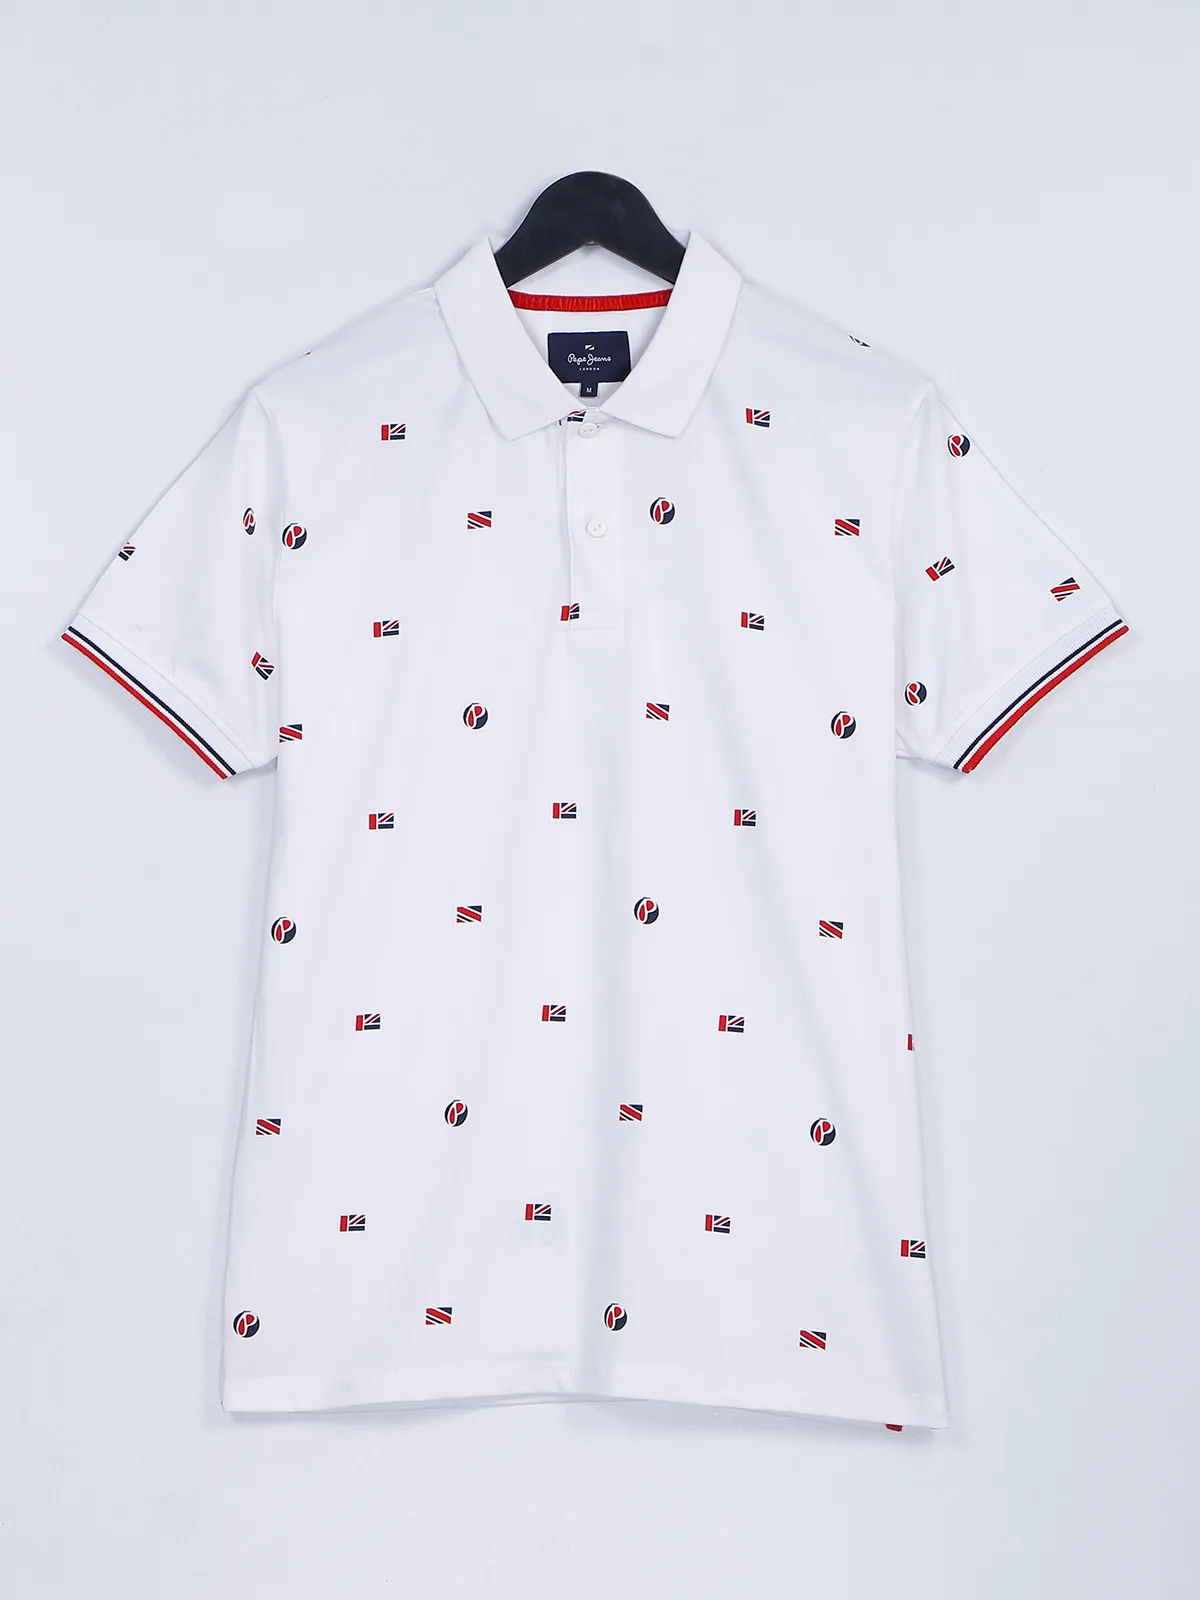 Pepe Jeans cotton slim fit t shirt in white